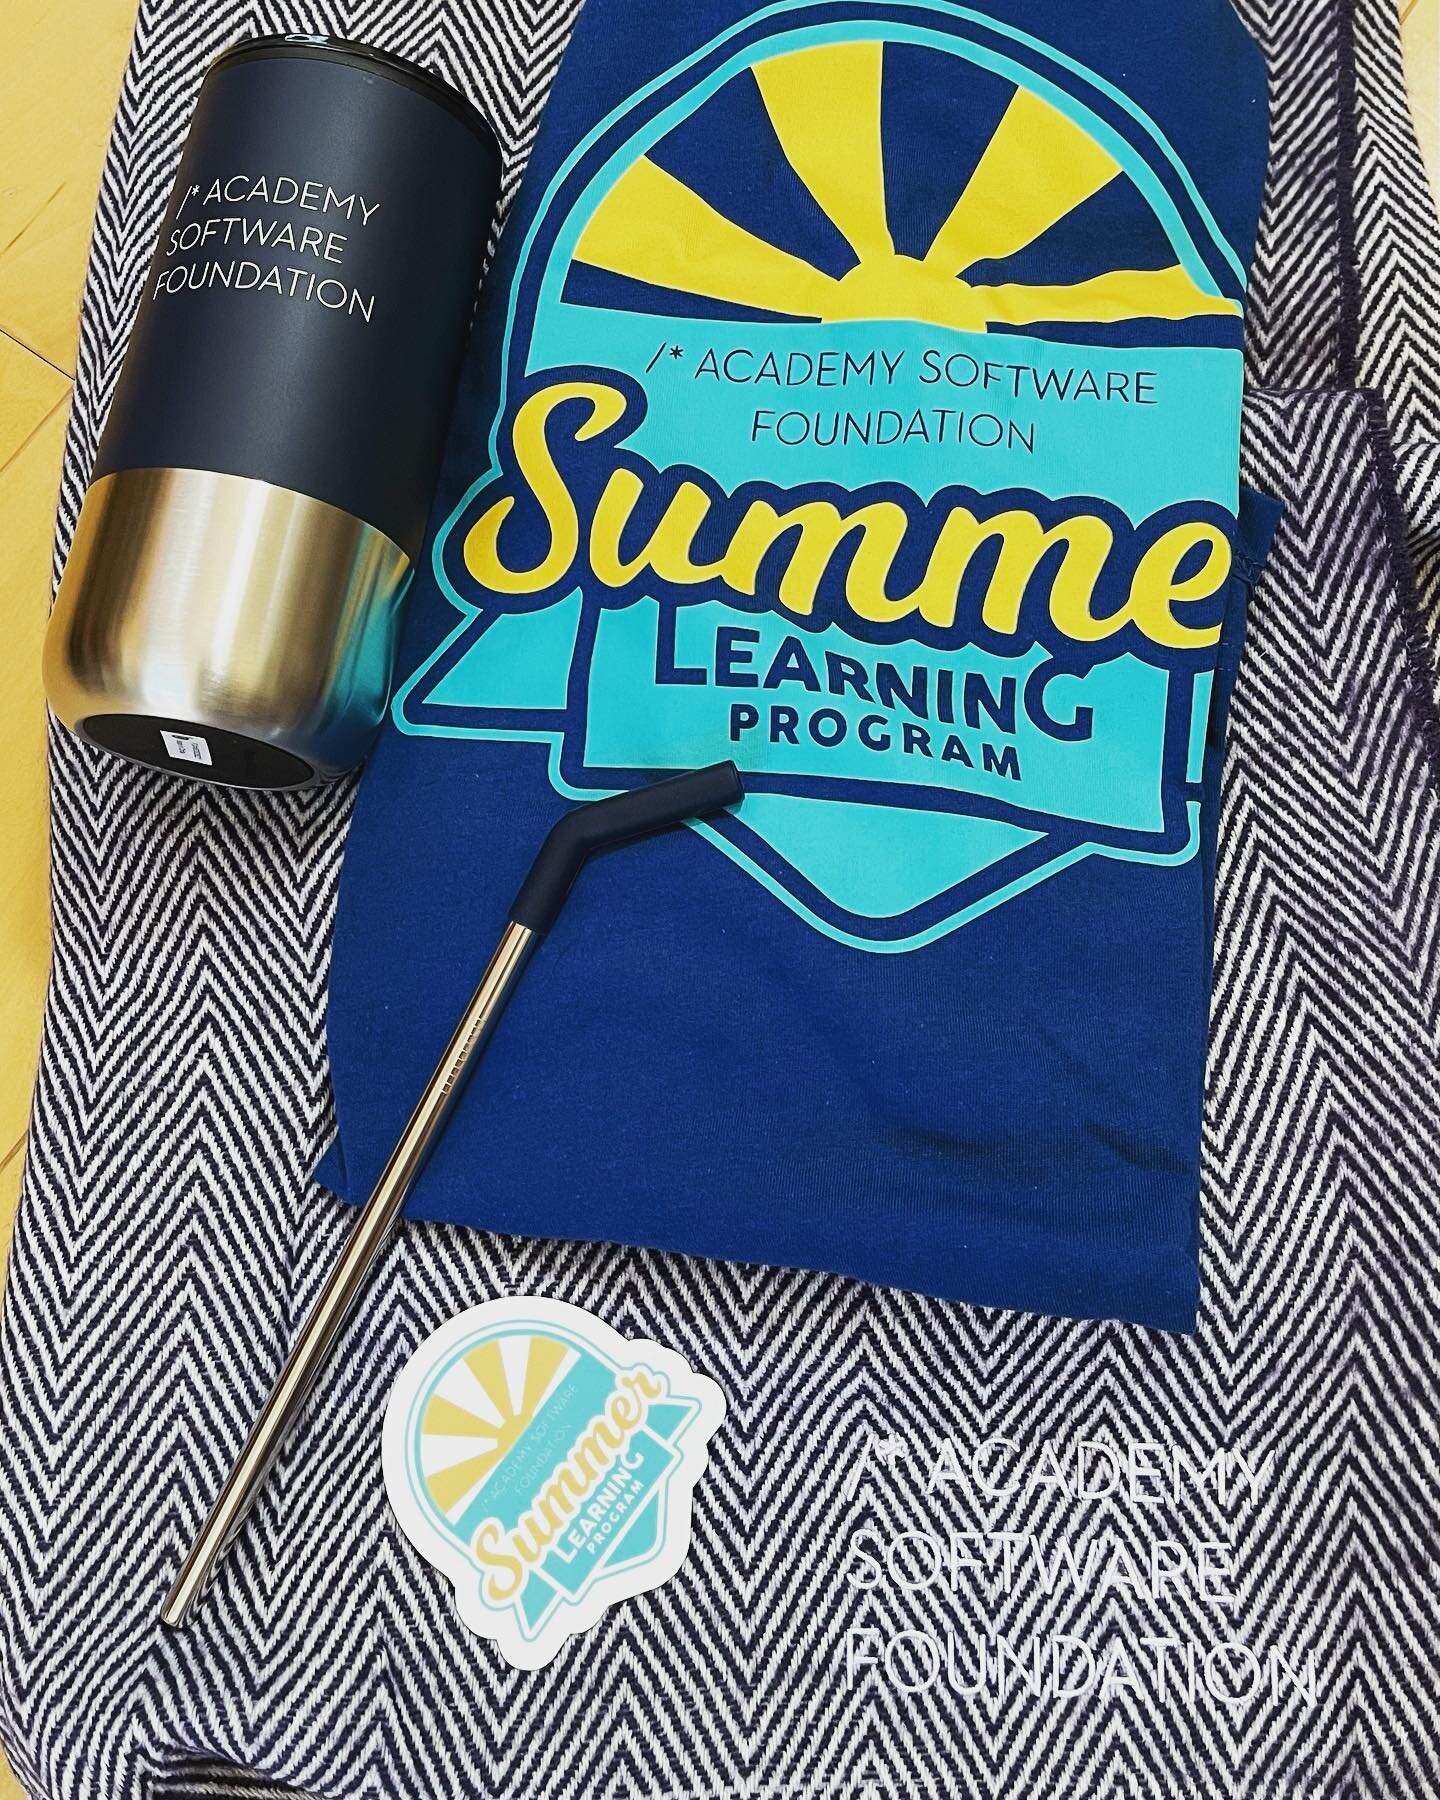 #thankyou @academy_software_foundation for this awesome #swag for #summerlearning program 😍 I am #grateful to be a part of it! #inclusivecommunity #software #vfx #academysoftwarefoundation